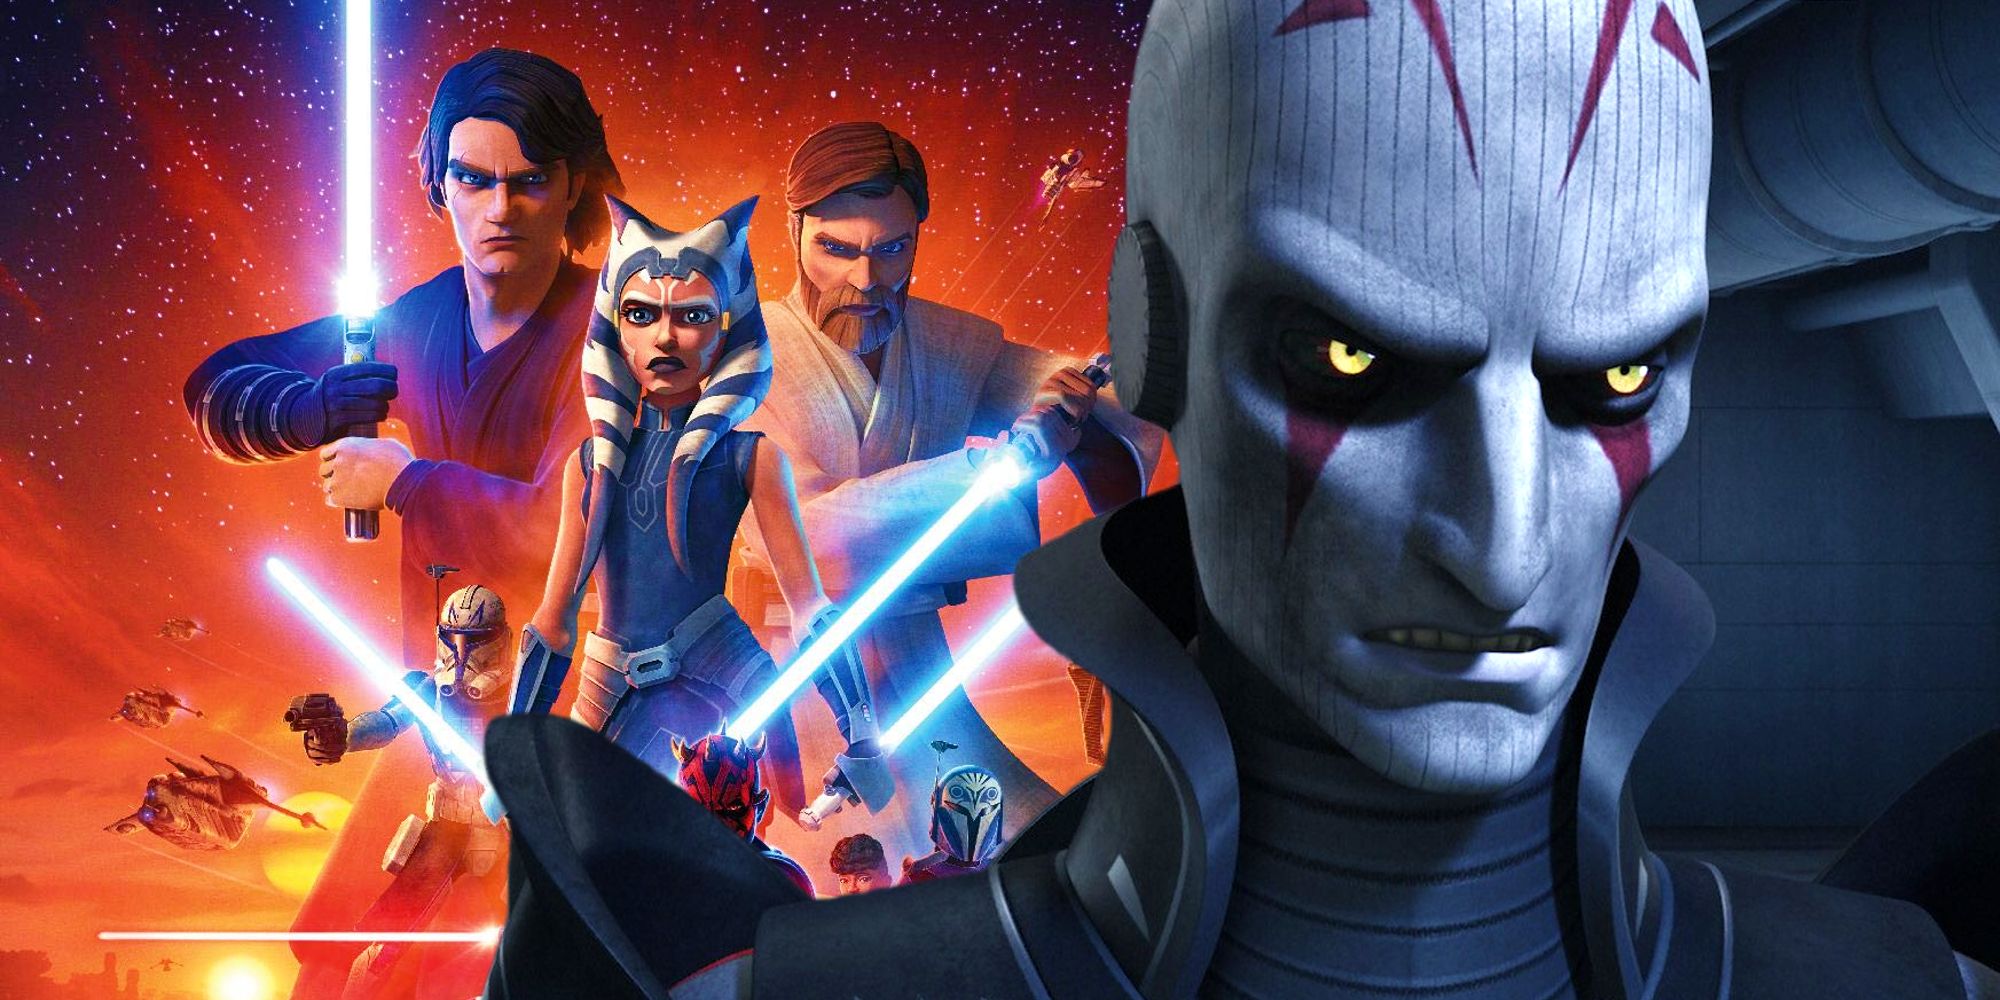 The Grand Inquisitor snarling in Star Wars Rebels next to the poster for The Clone Wars season 7